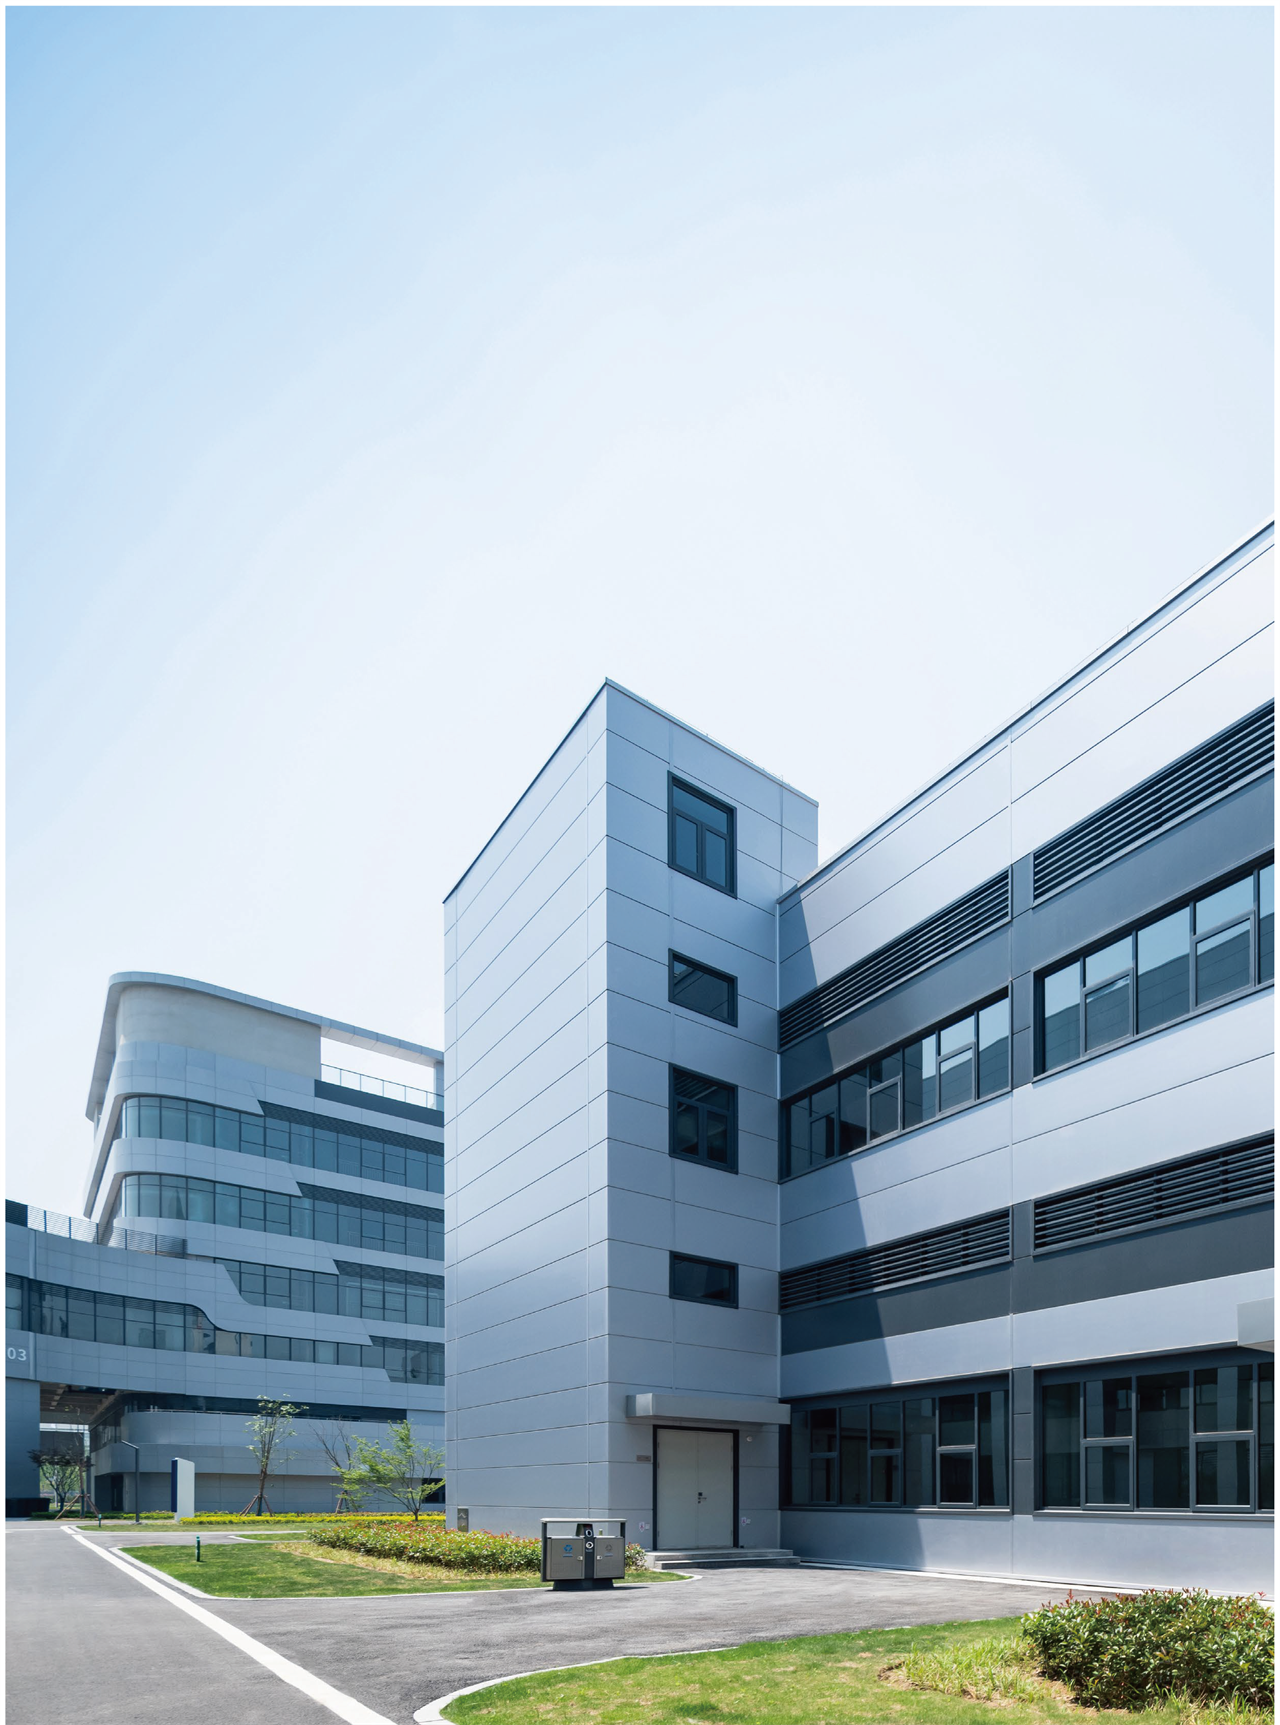 Prefabricated construction technology enables the development of innovative pharmaceutical industrial park(图7)